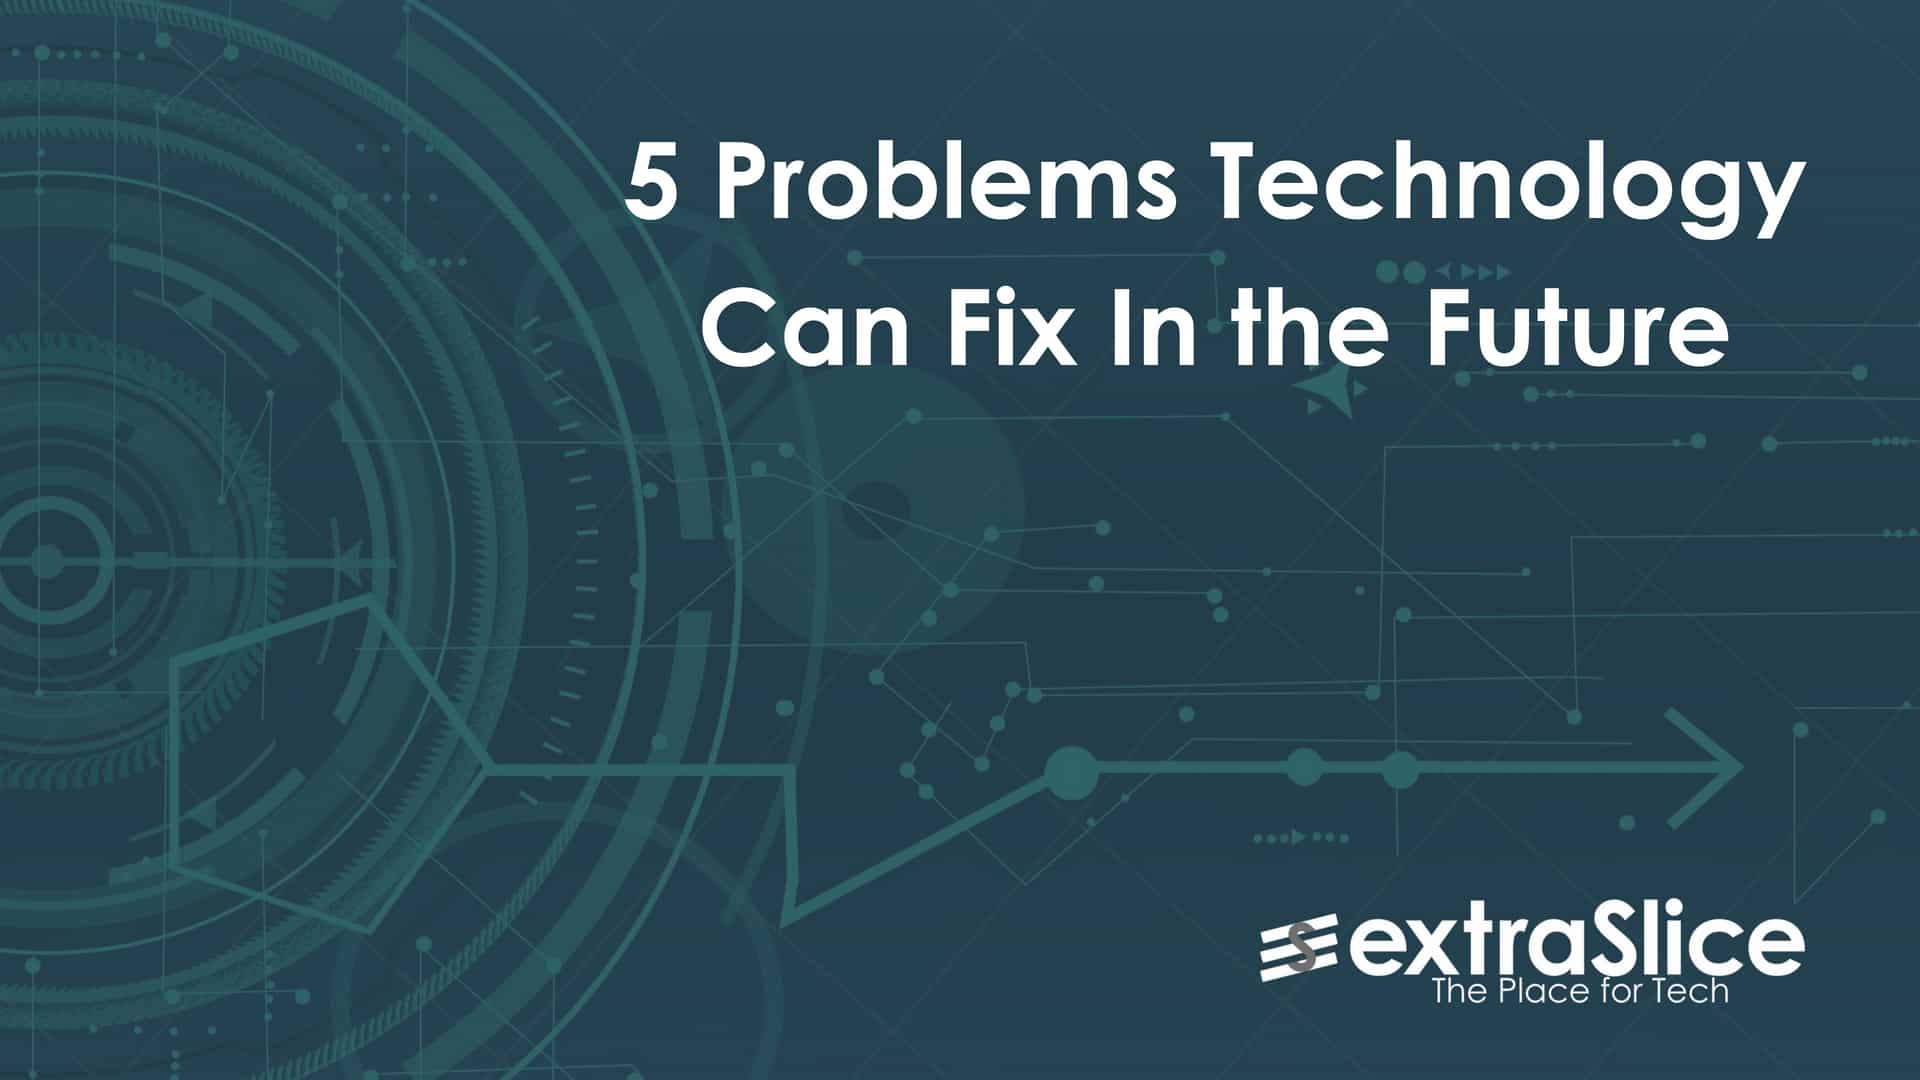 5 problems that technology can fix in the future over navy blue extraSlice theme image